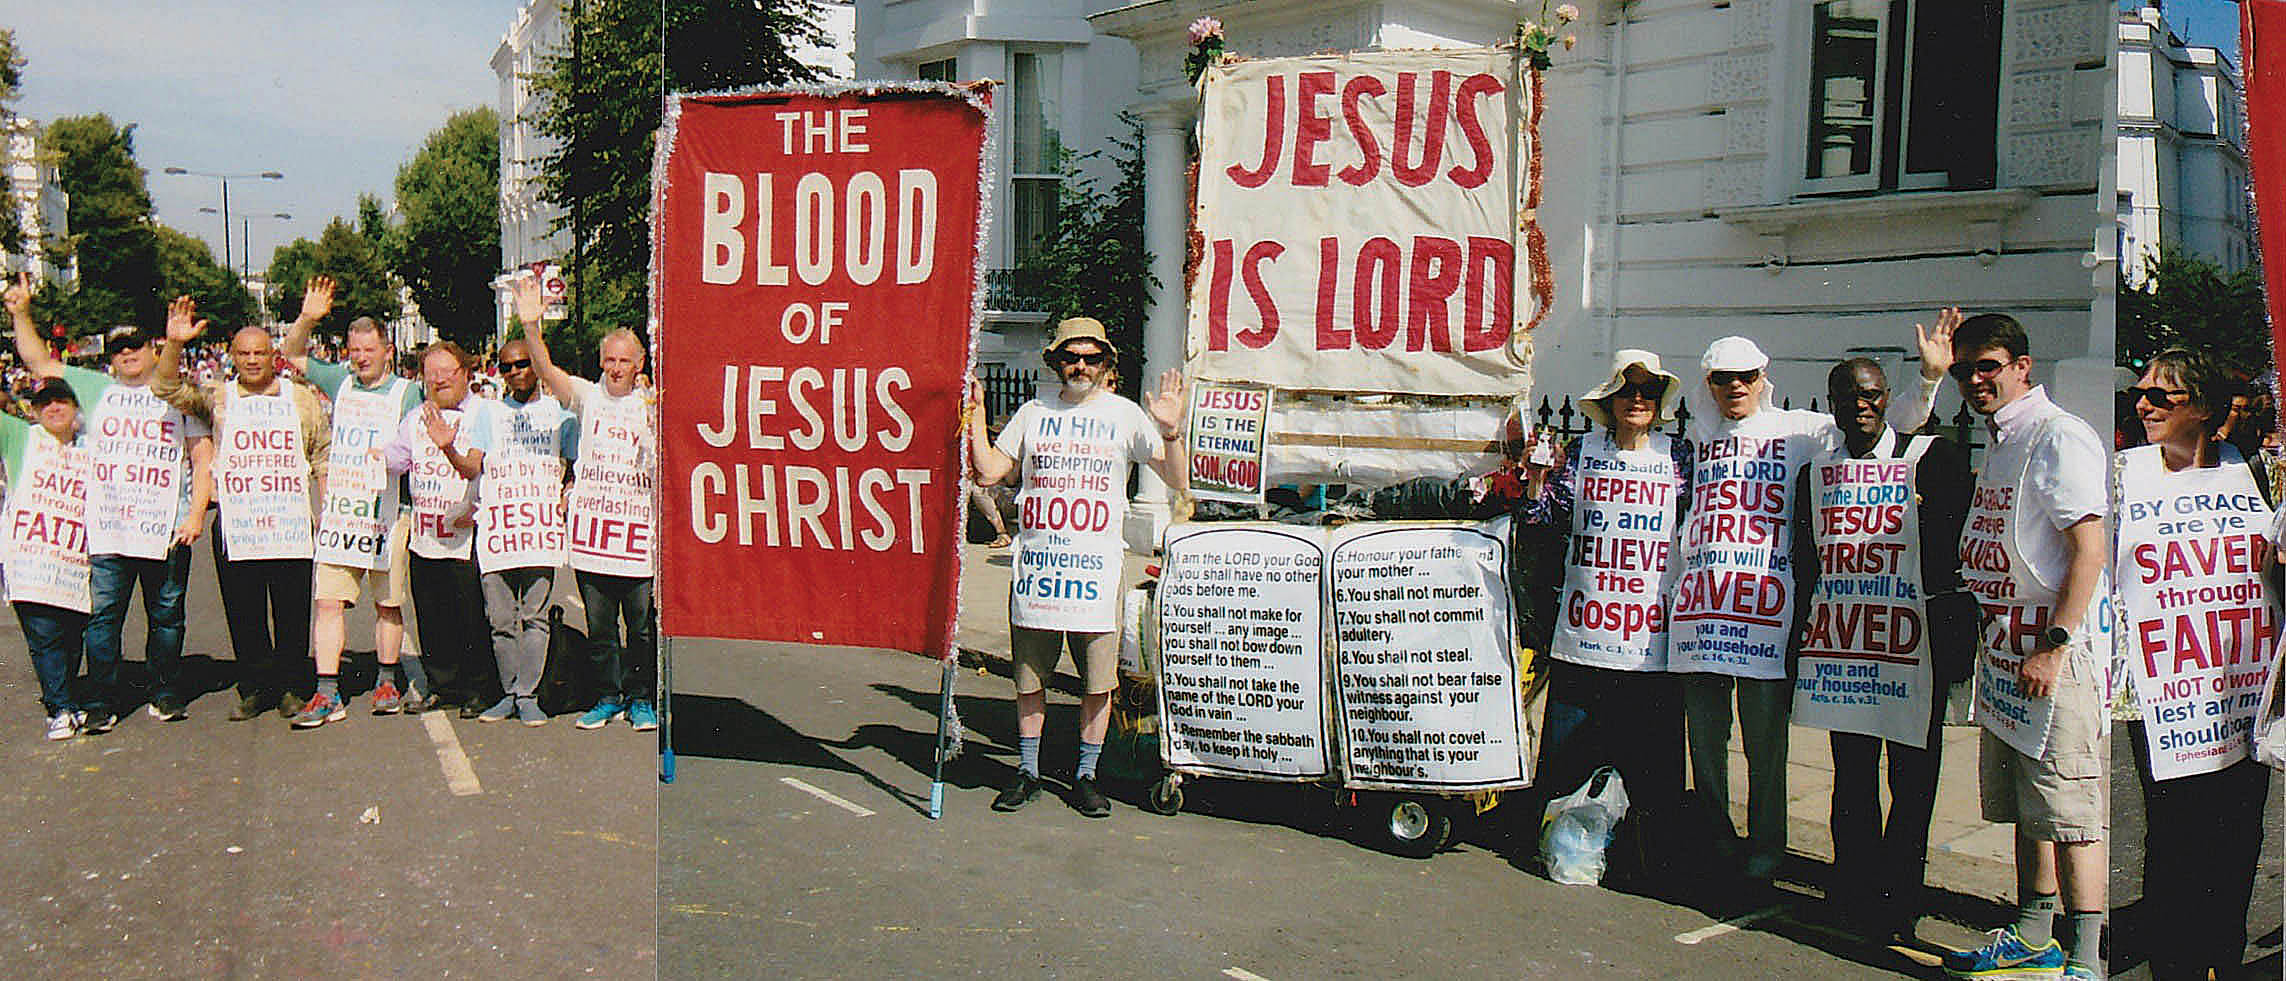 For a quarter of a century street preachers have boldly proclaimed the Gospel at the Notting Hill Carnival in London, and this year was no exception. On 27 and 28 August, 22 Christians took part in this annual outreach, bravely wearing big Bible messages. City preacher Roland Parsons, who had travelled down from Gloucester, said: “Around 8,000 tracts were given out” and “46 members of the public made a sincere request to receive a King James Bible free.” Roland stuck to his task despite being heavily bandaged after sustaining a two-inch gash on his forehead the day before he was due to preach.